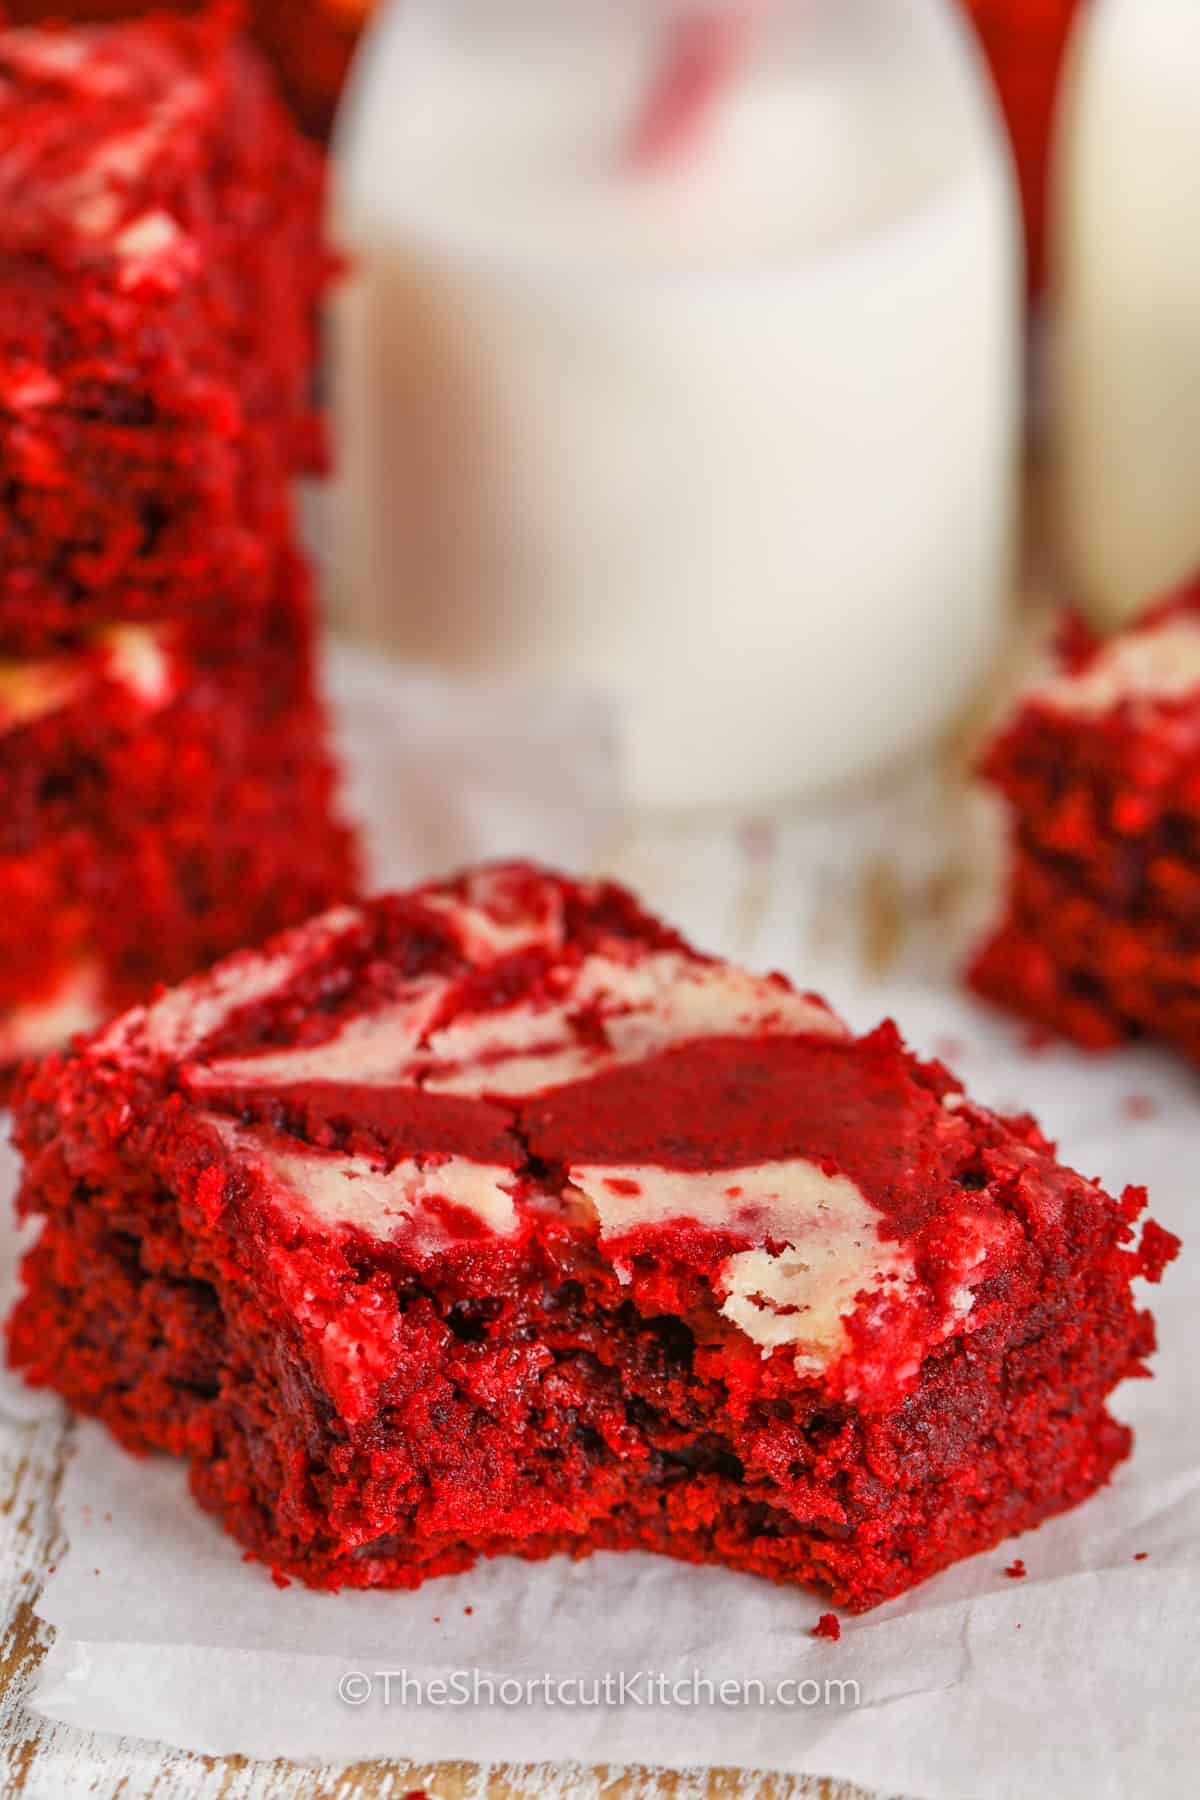 A red velvet brownies with a bite out of it